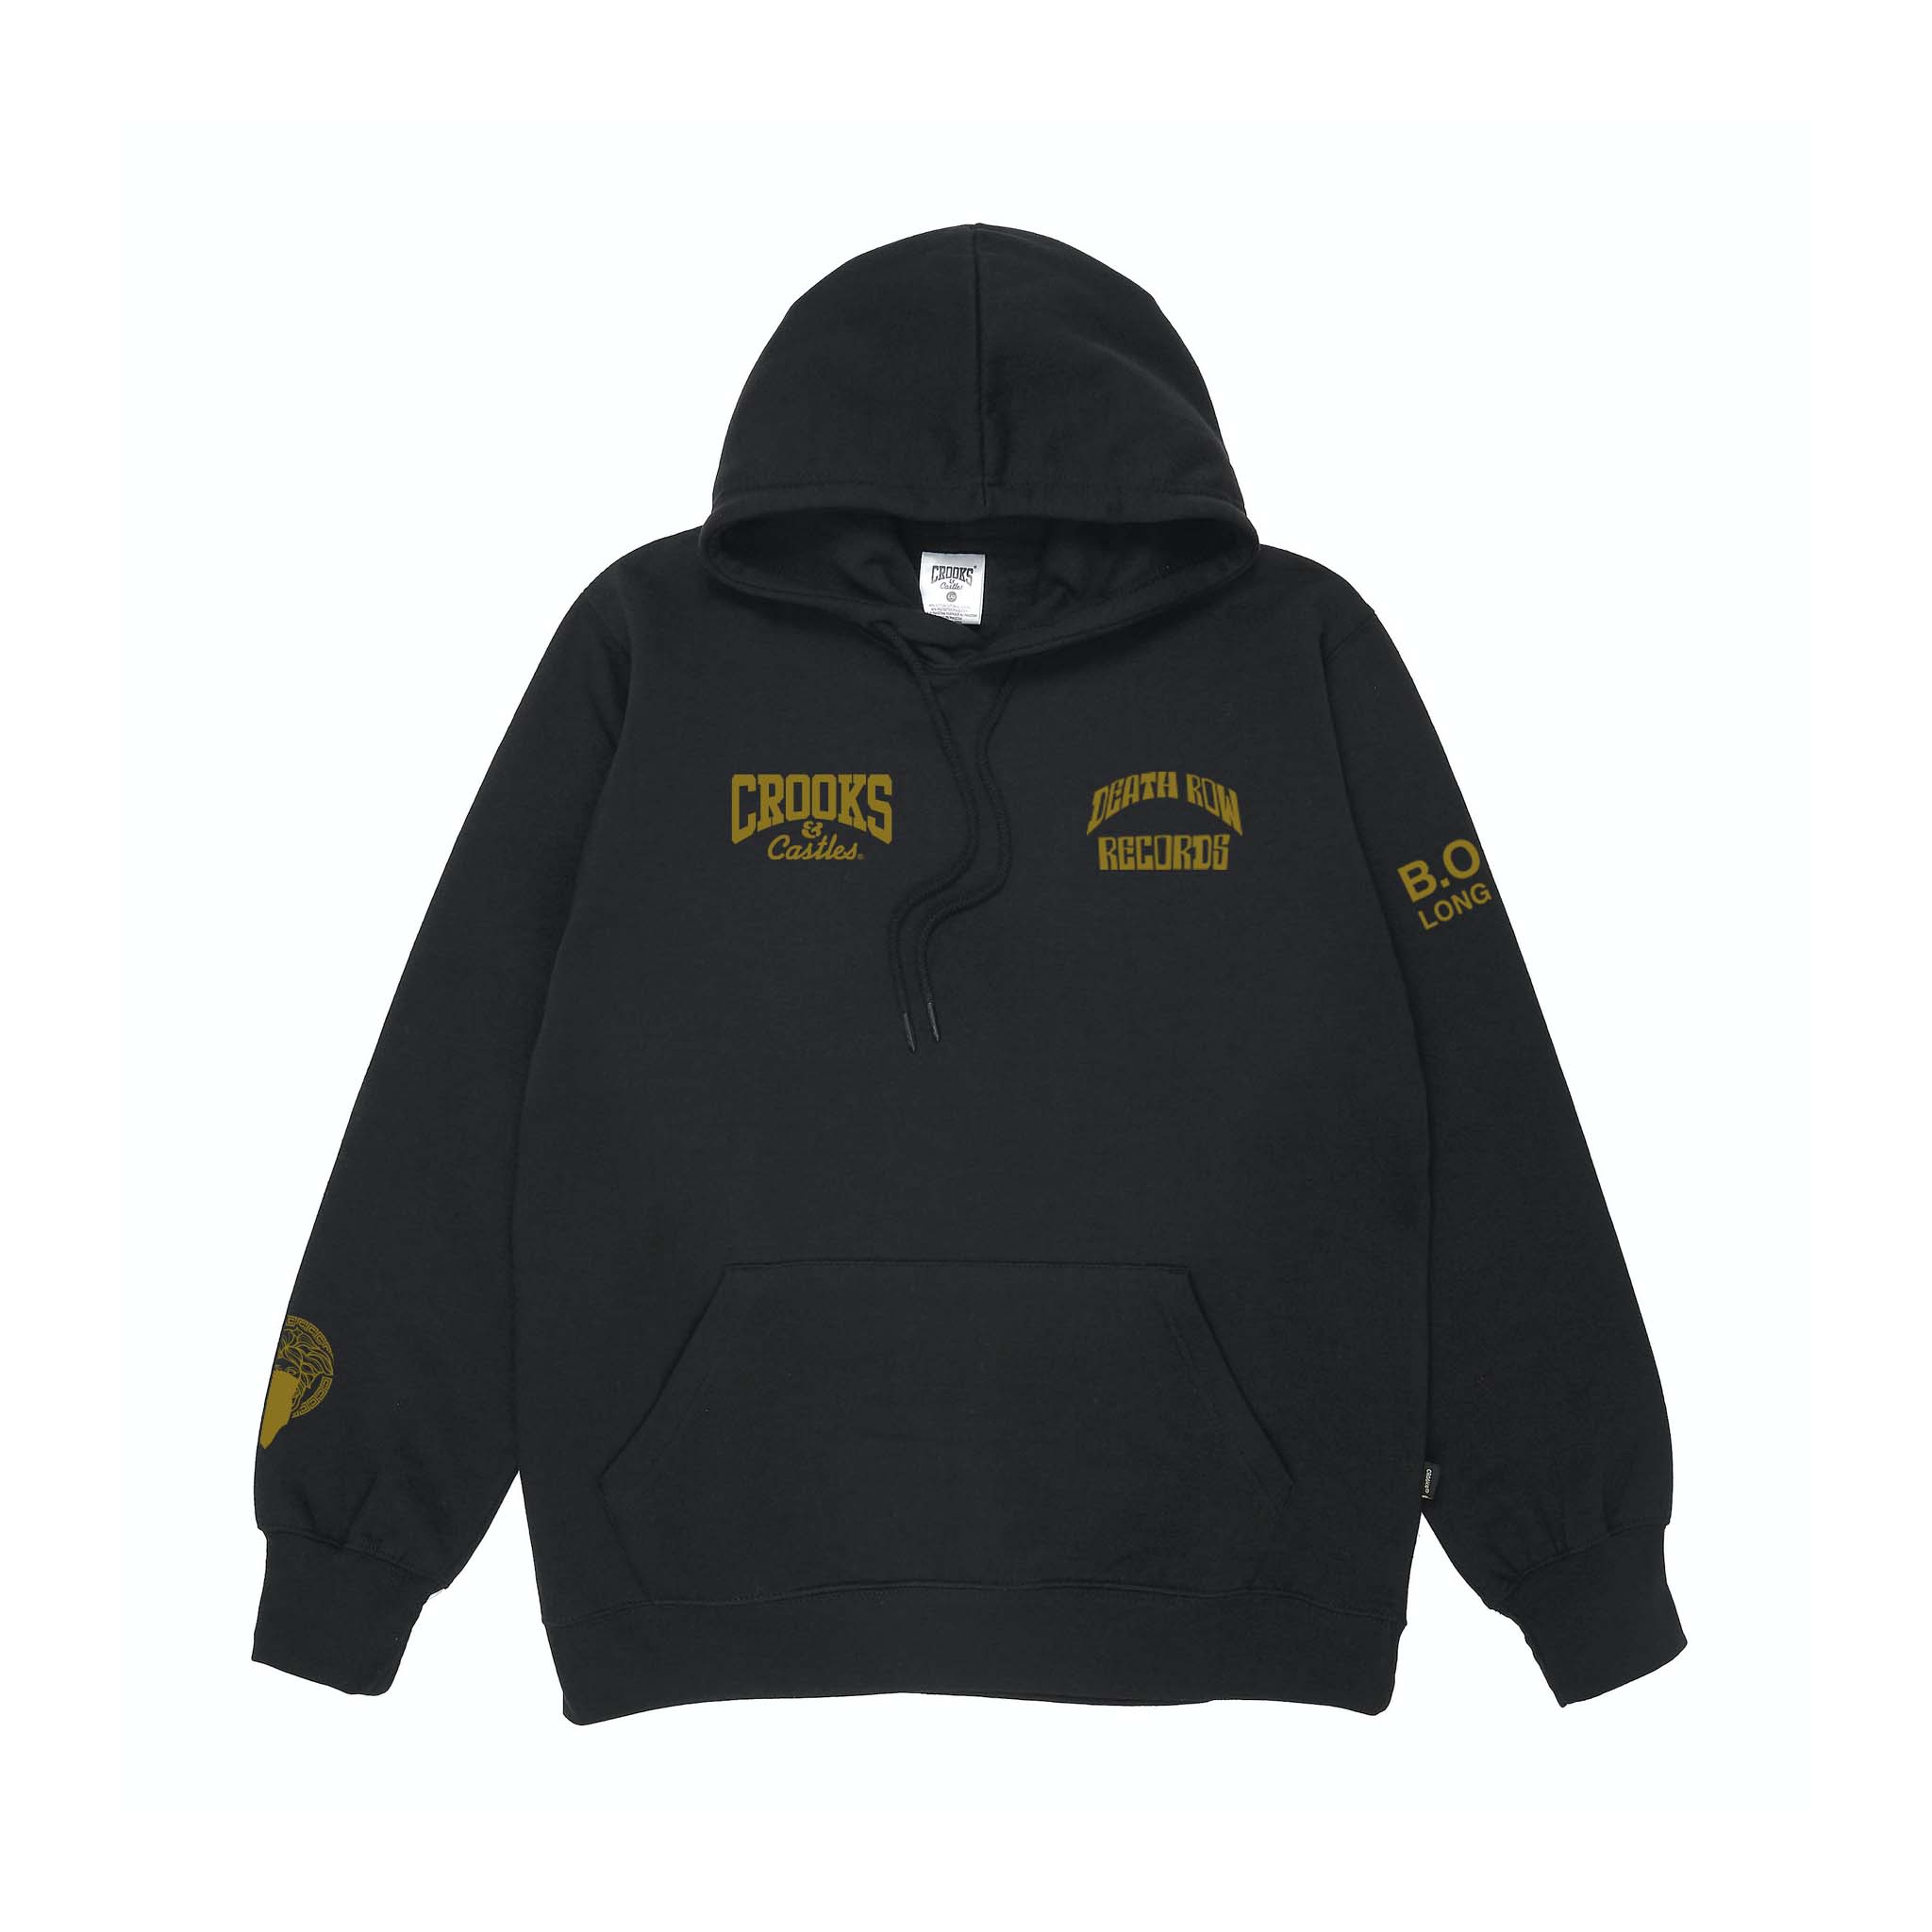 Death Row x Crooks Hoodie in Gold